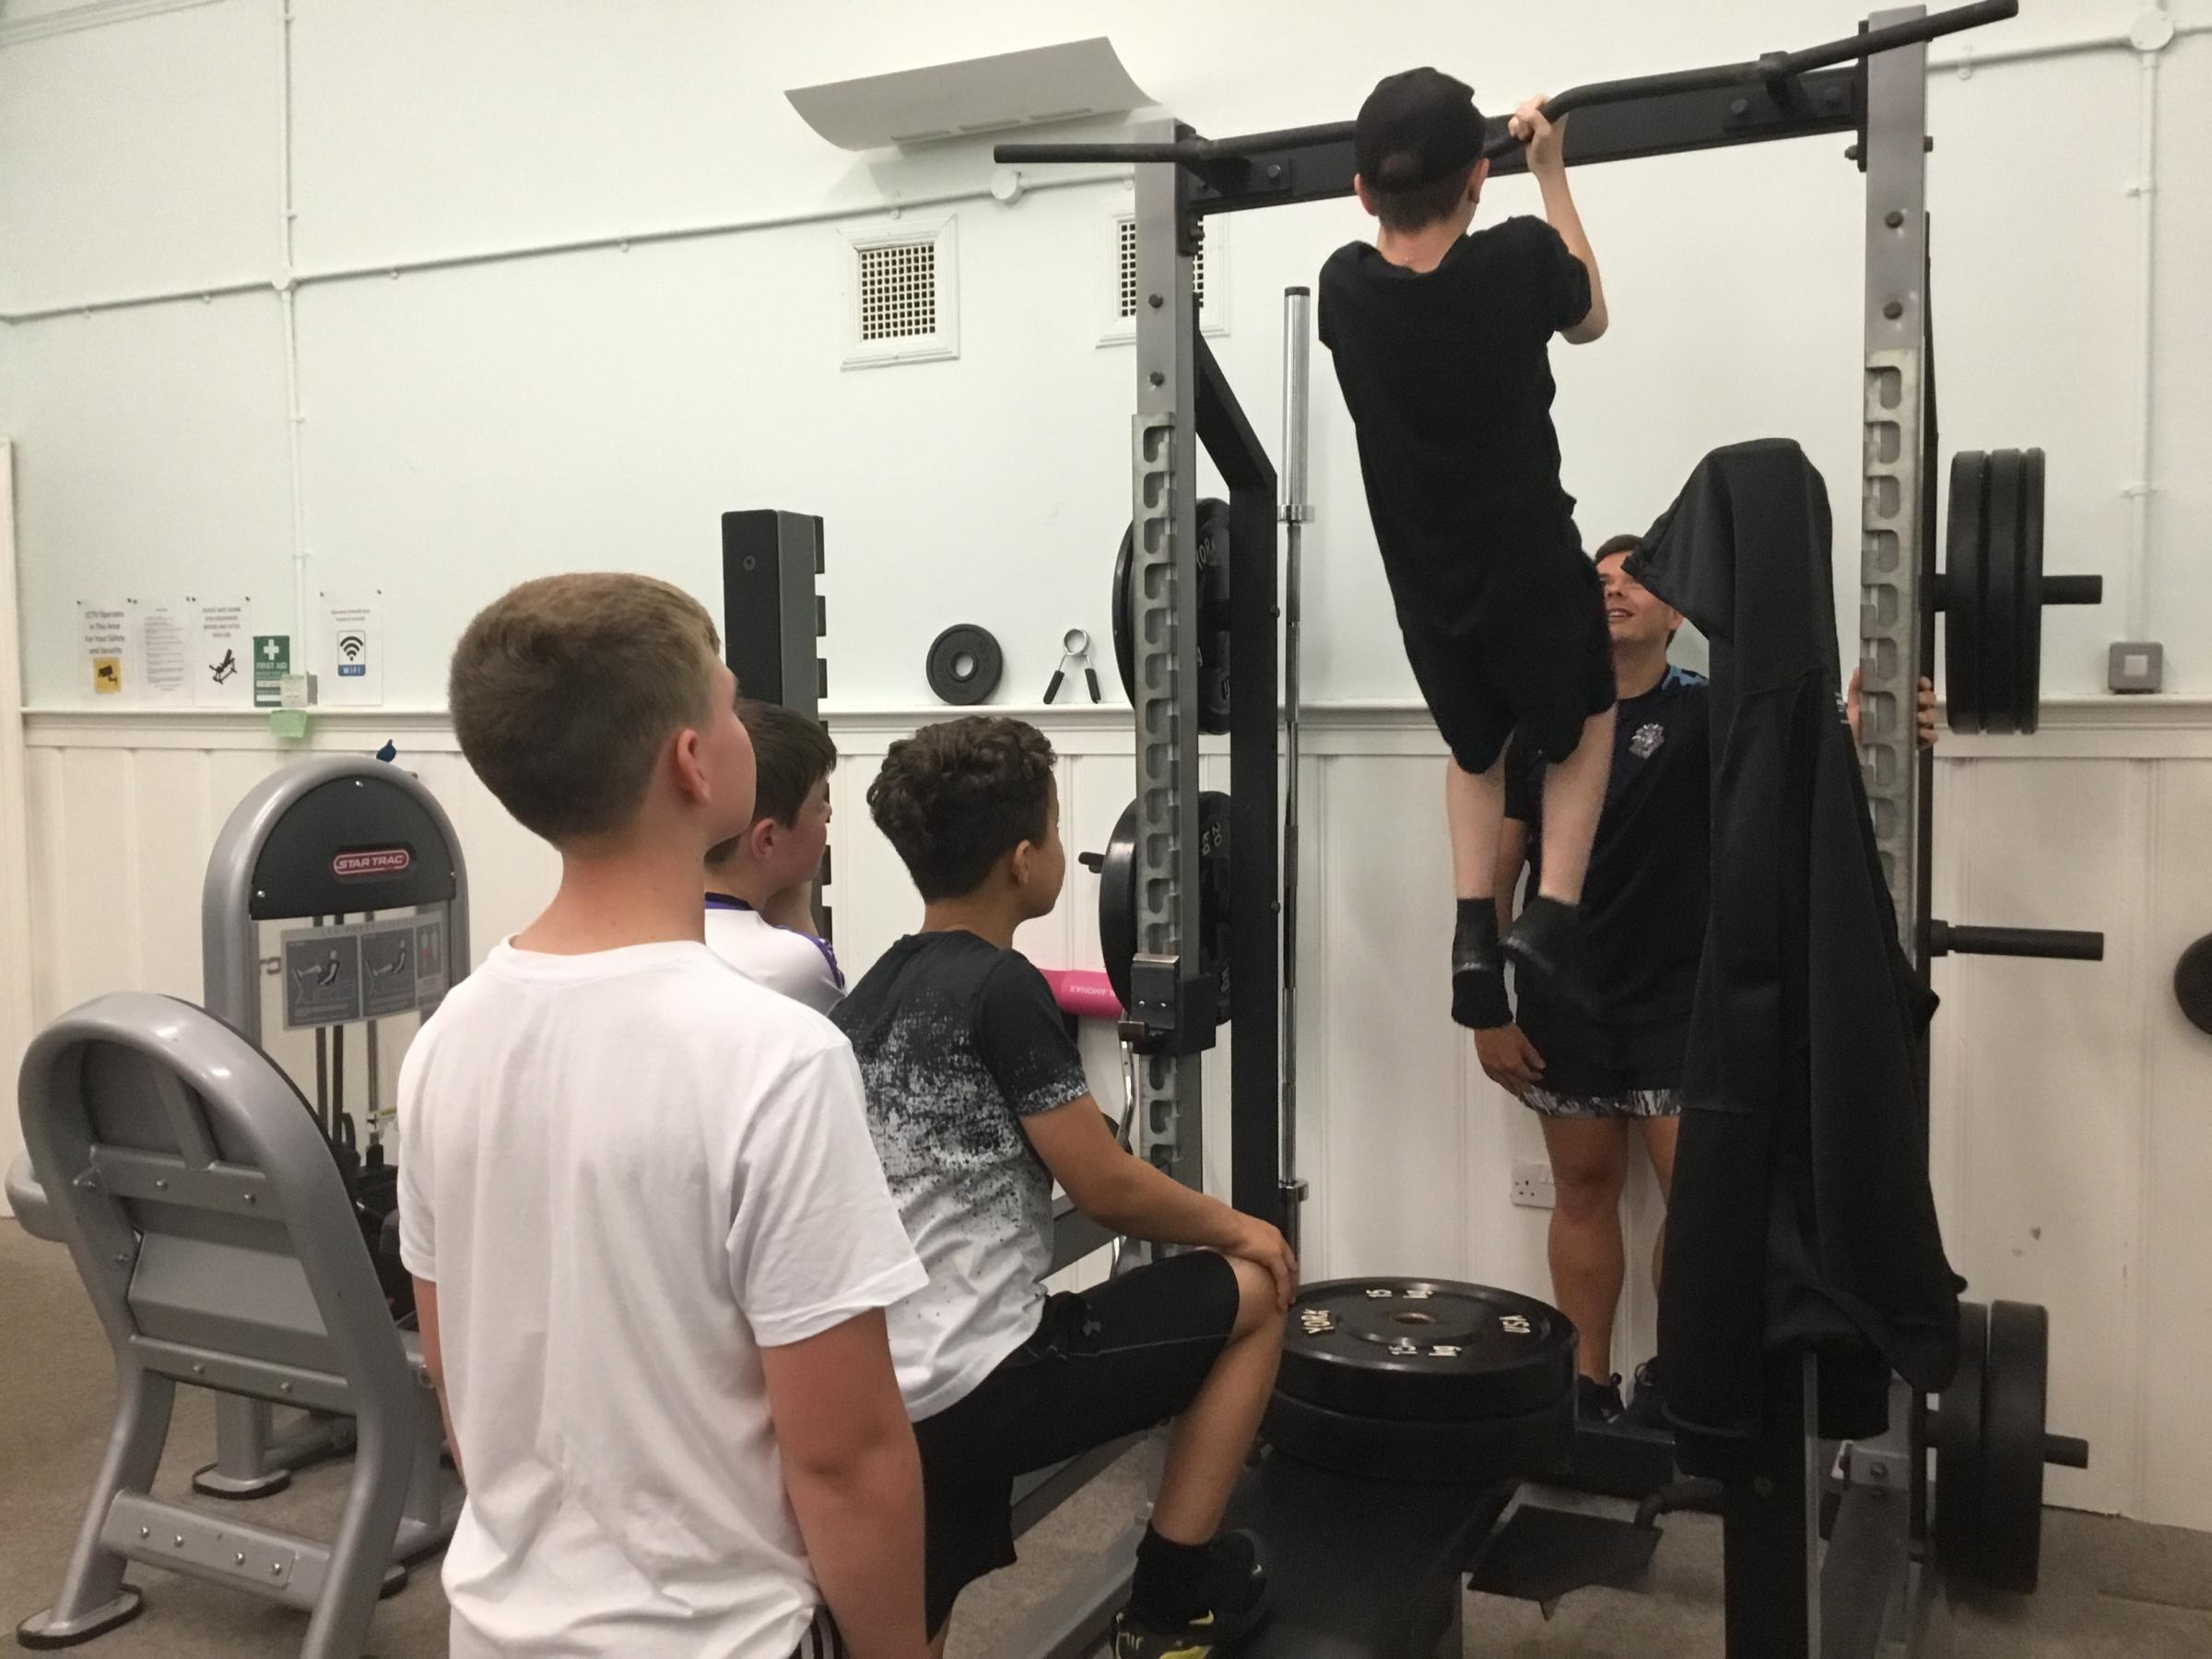 Route 81 young people got access to the gym at Centre 81 with guidance from Mark of Superbia Performance